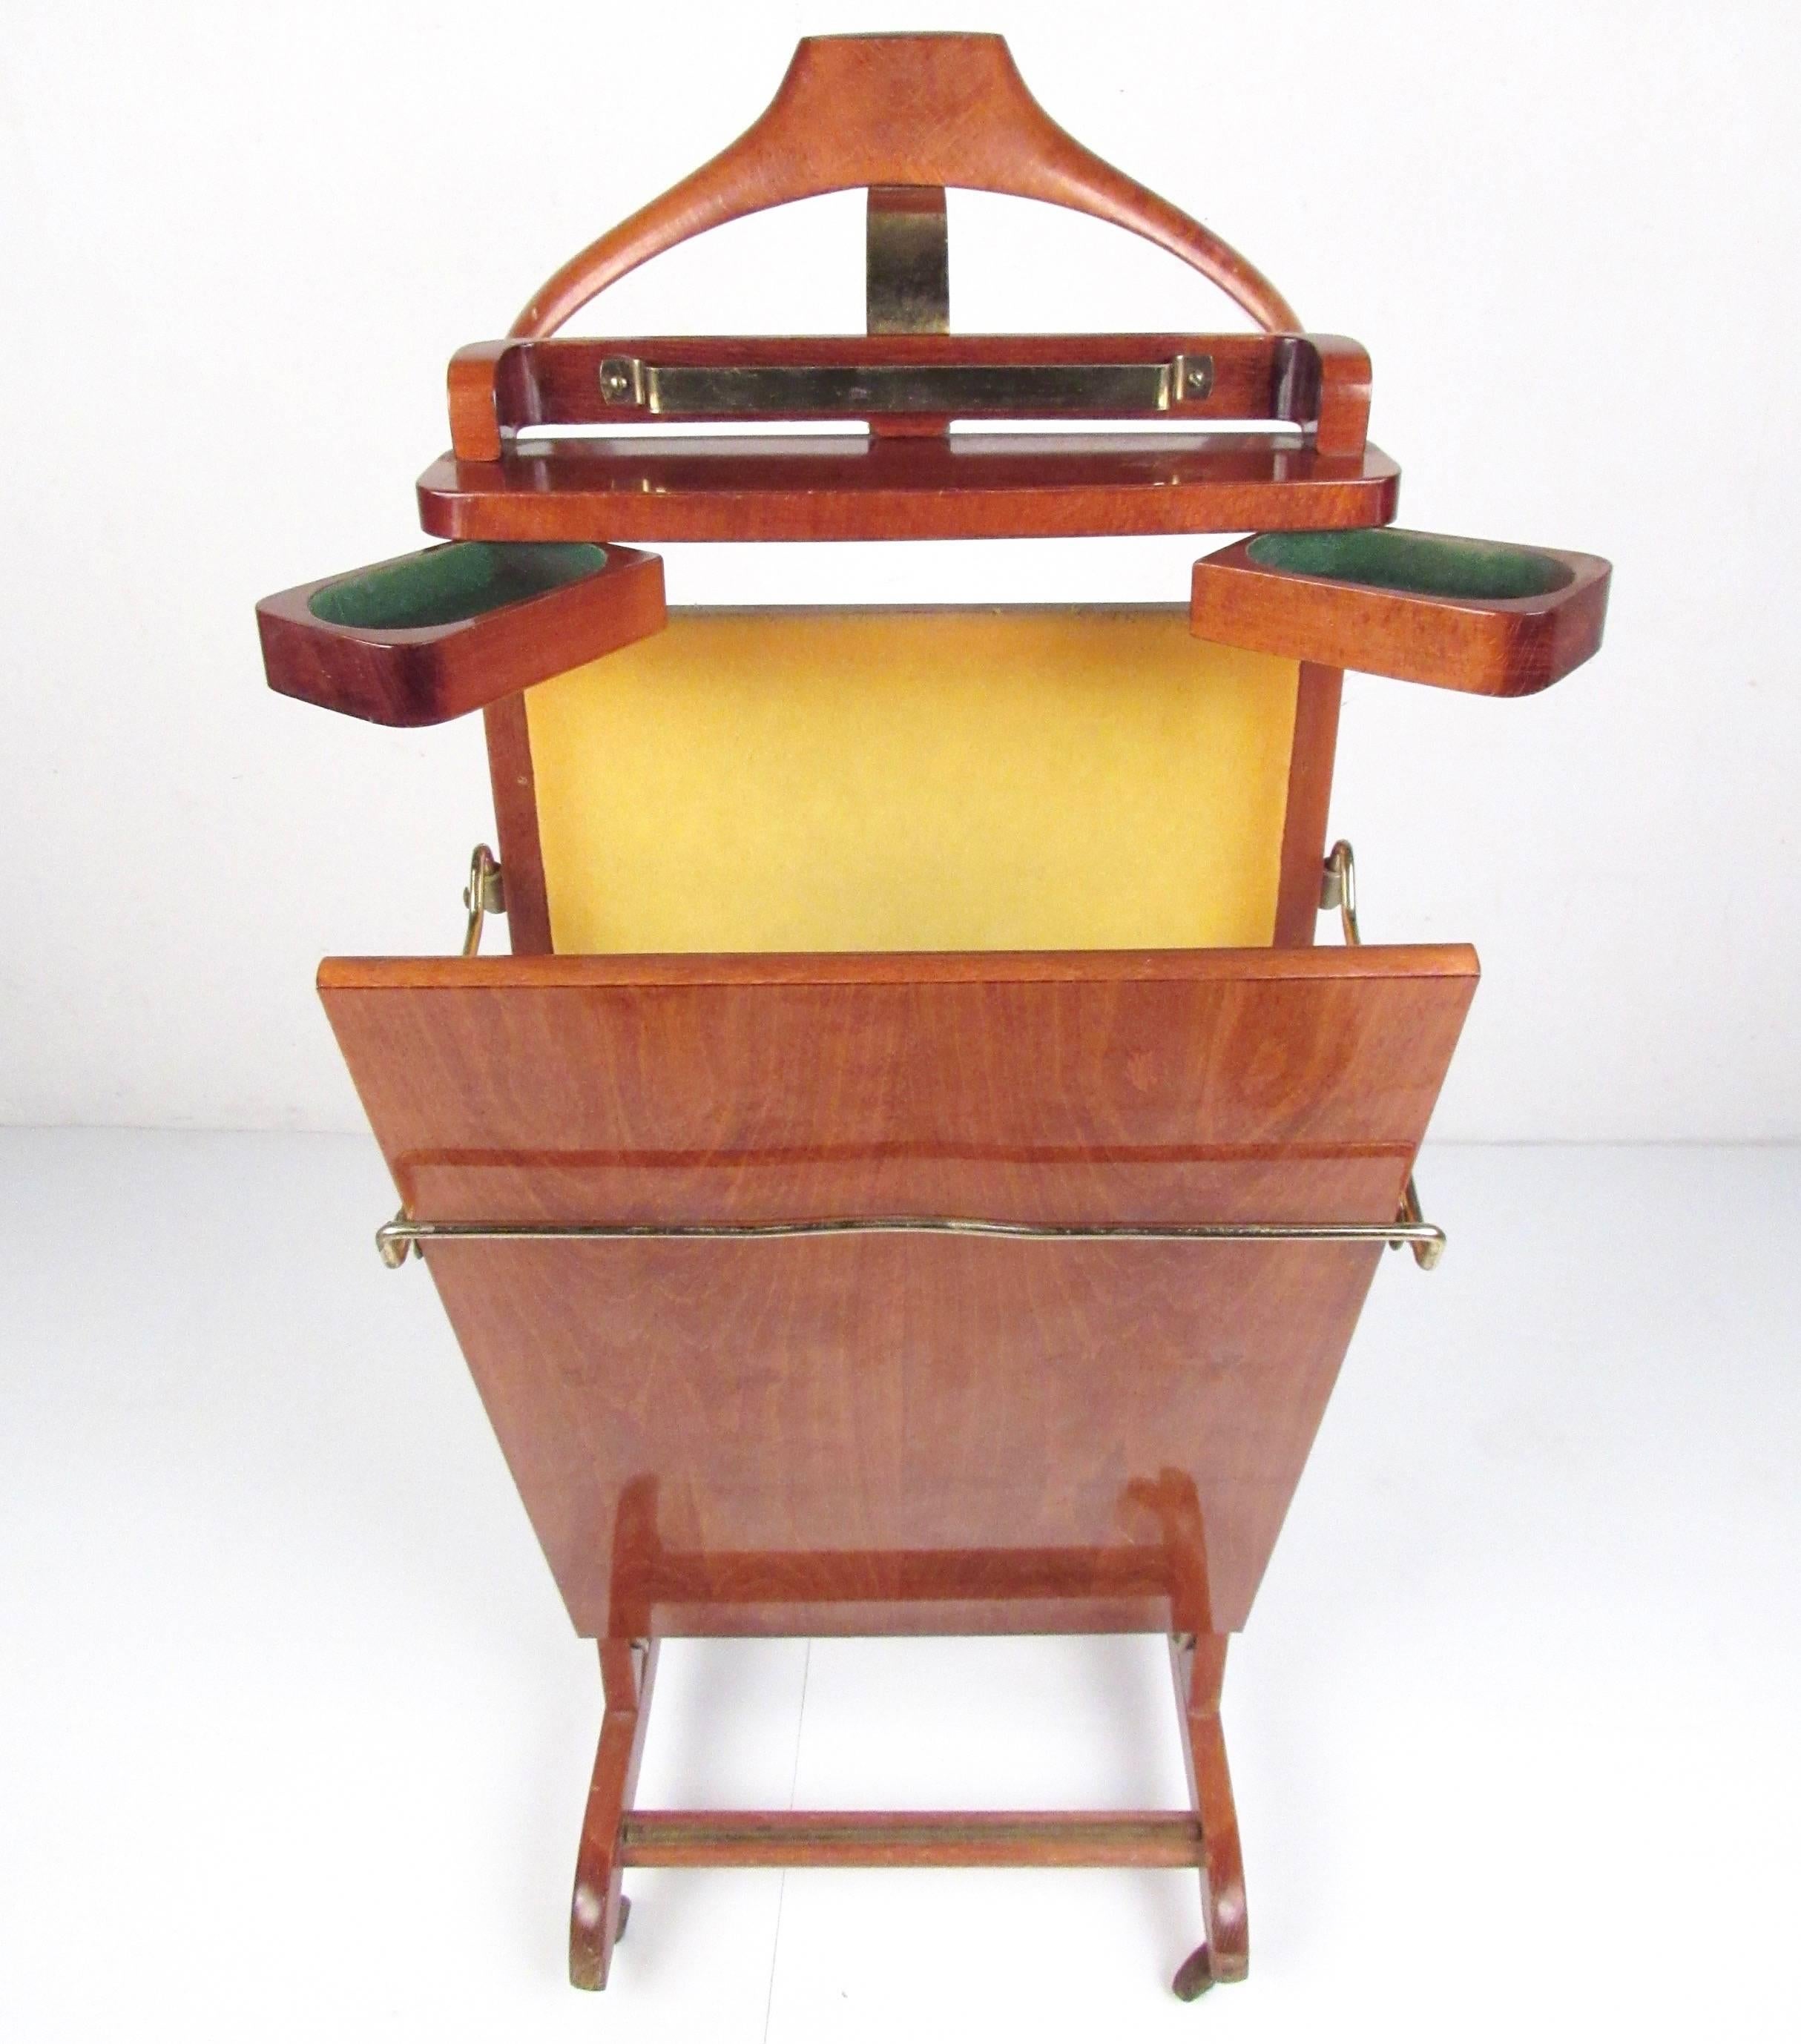 This stylish and versatile midcentury valet stand by Fratelli Reguitti was made in Italy from quality walnut and designed as an elegant modern gentleman's valet. Built-in trouser press, cuff link holder, and jacket valet, this versatile Italian